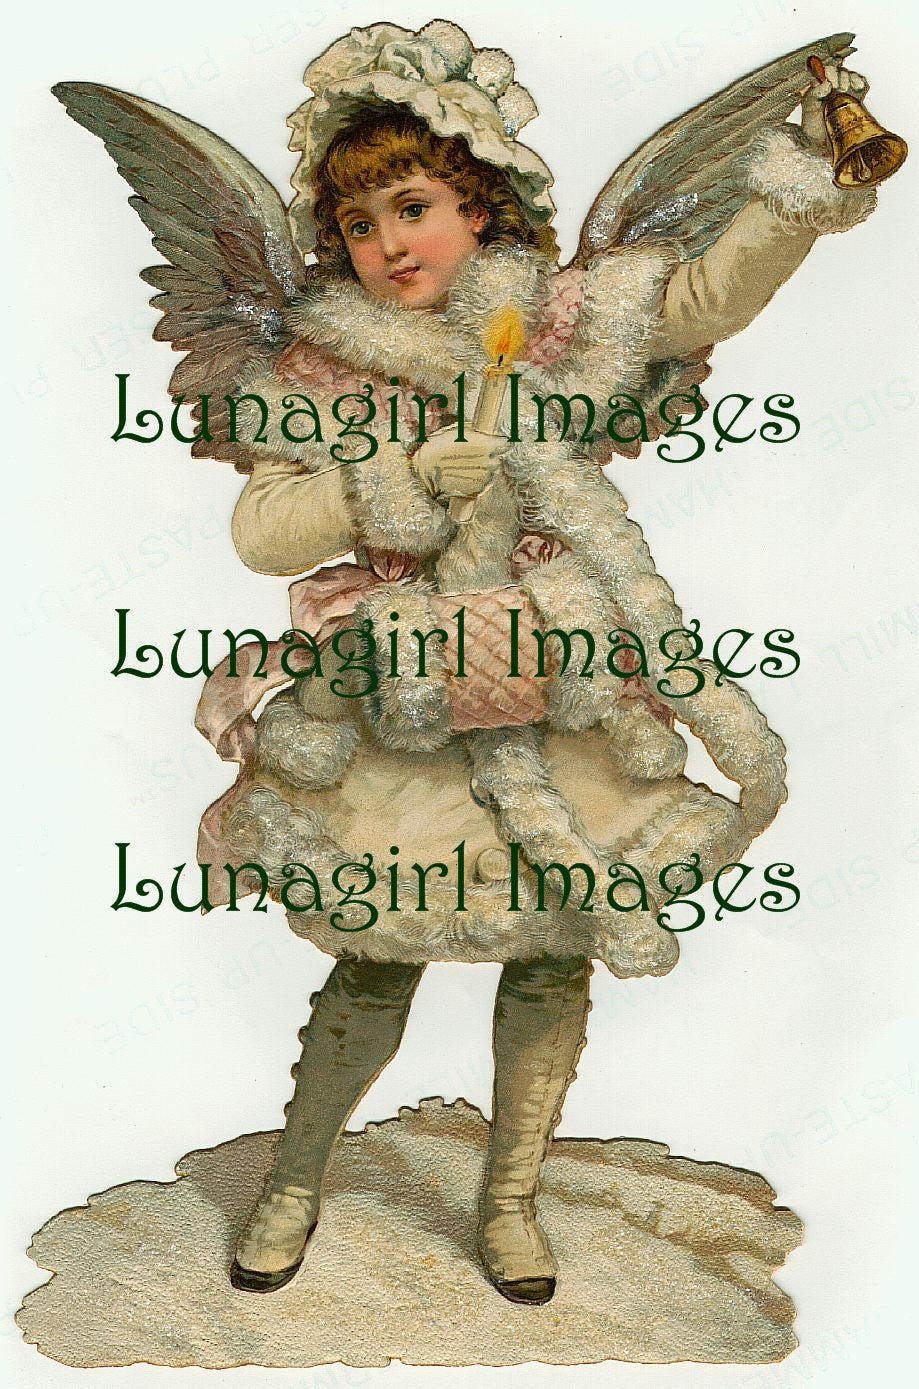 Victorian Holidays #1: Christmas & New Years: 1000 Images - Lunagirl